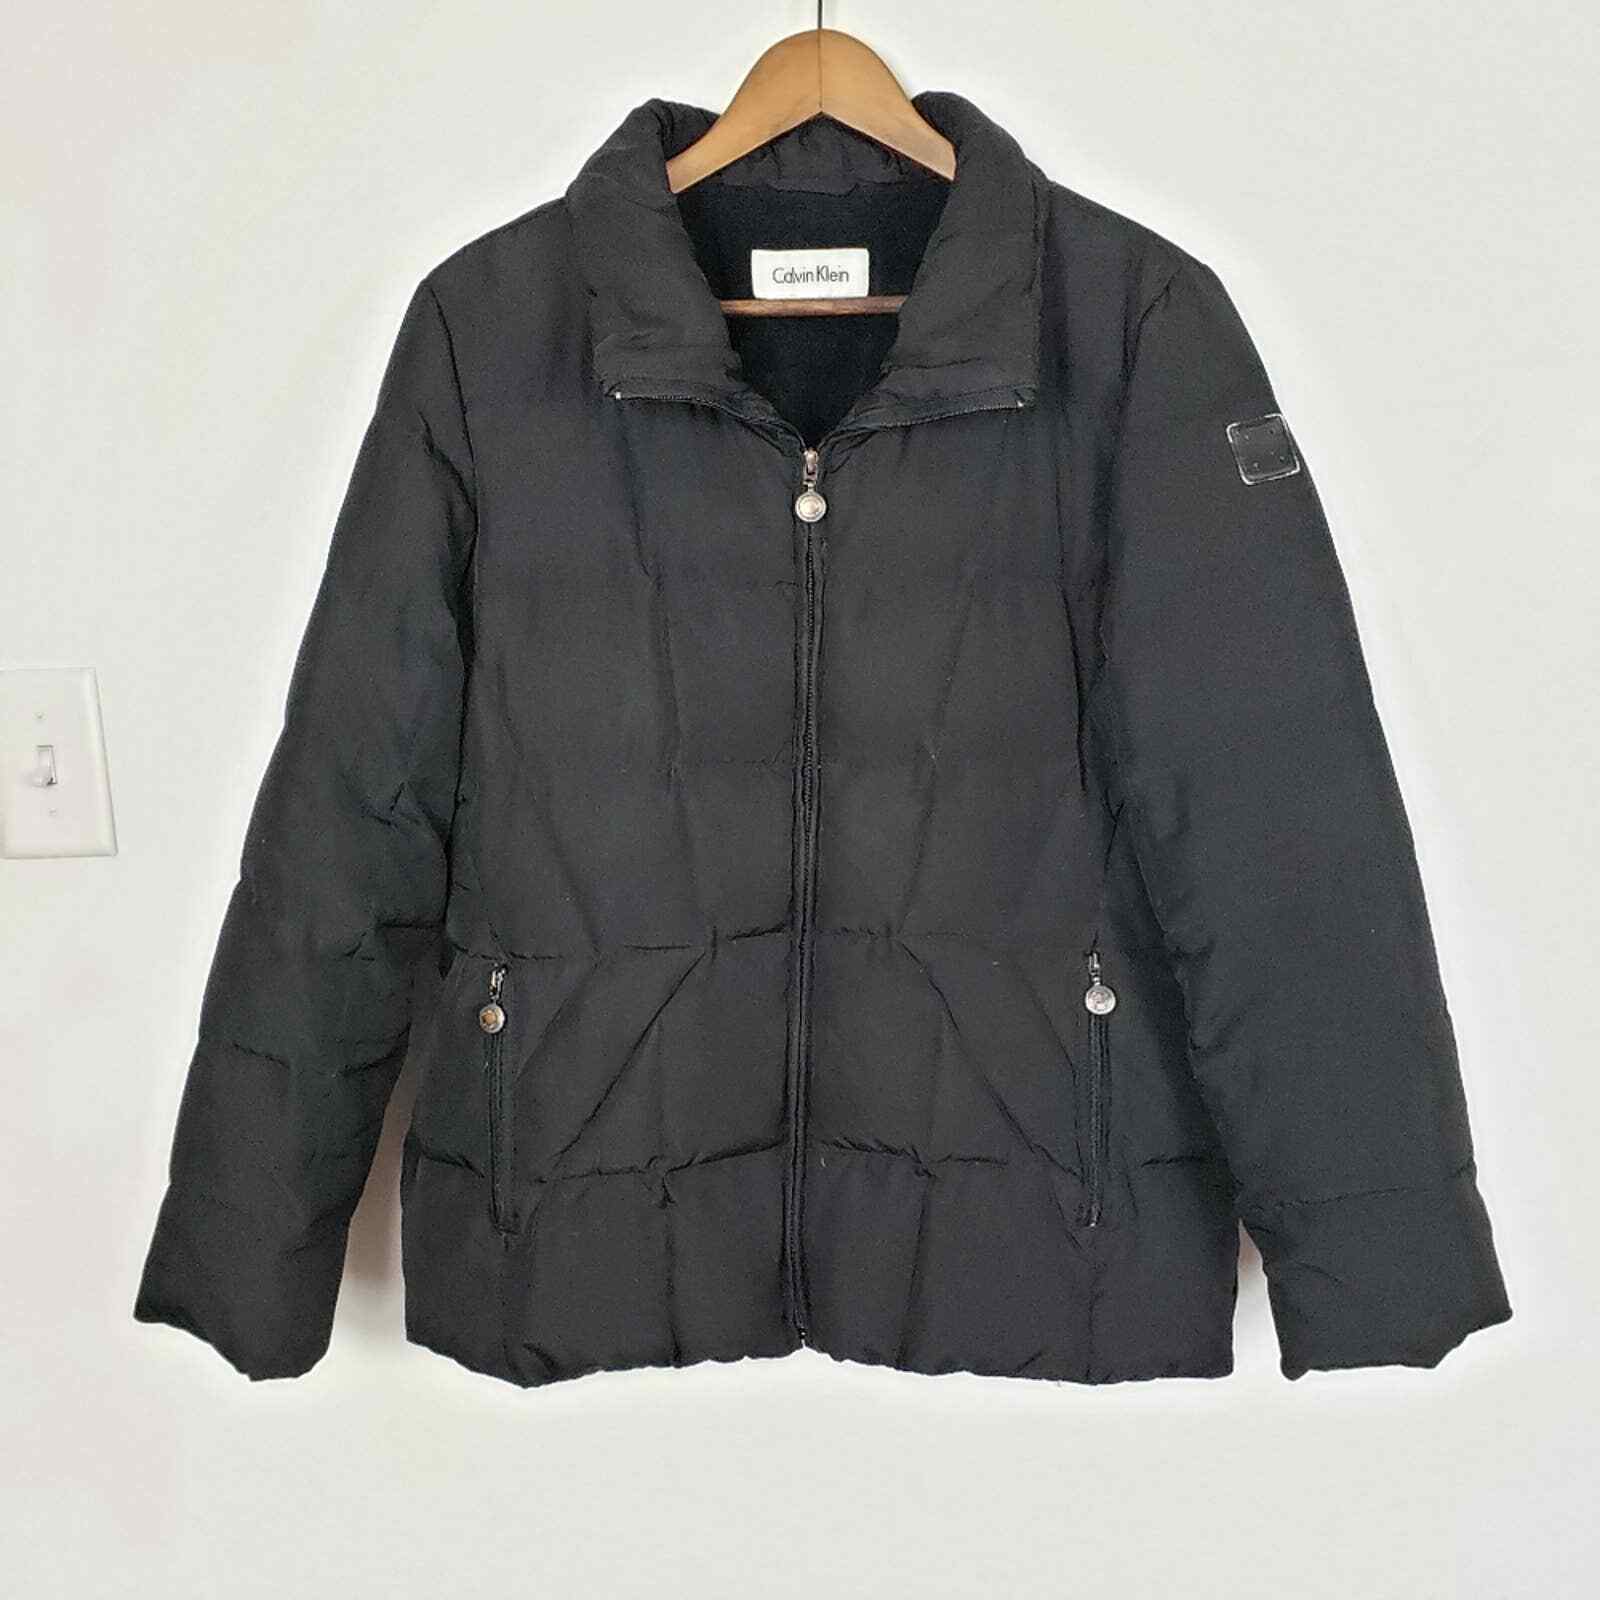 Calvin Klein black down puffer jacket quilted coat winter Large